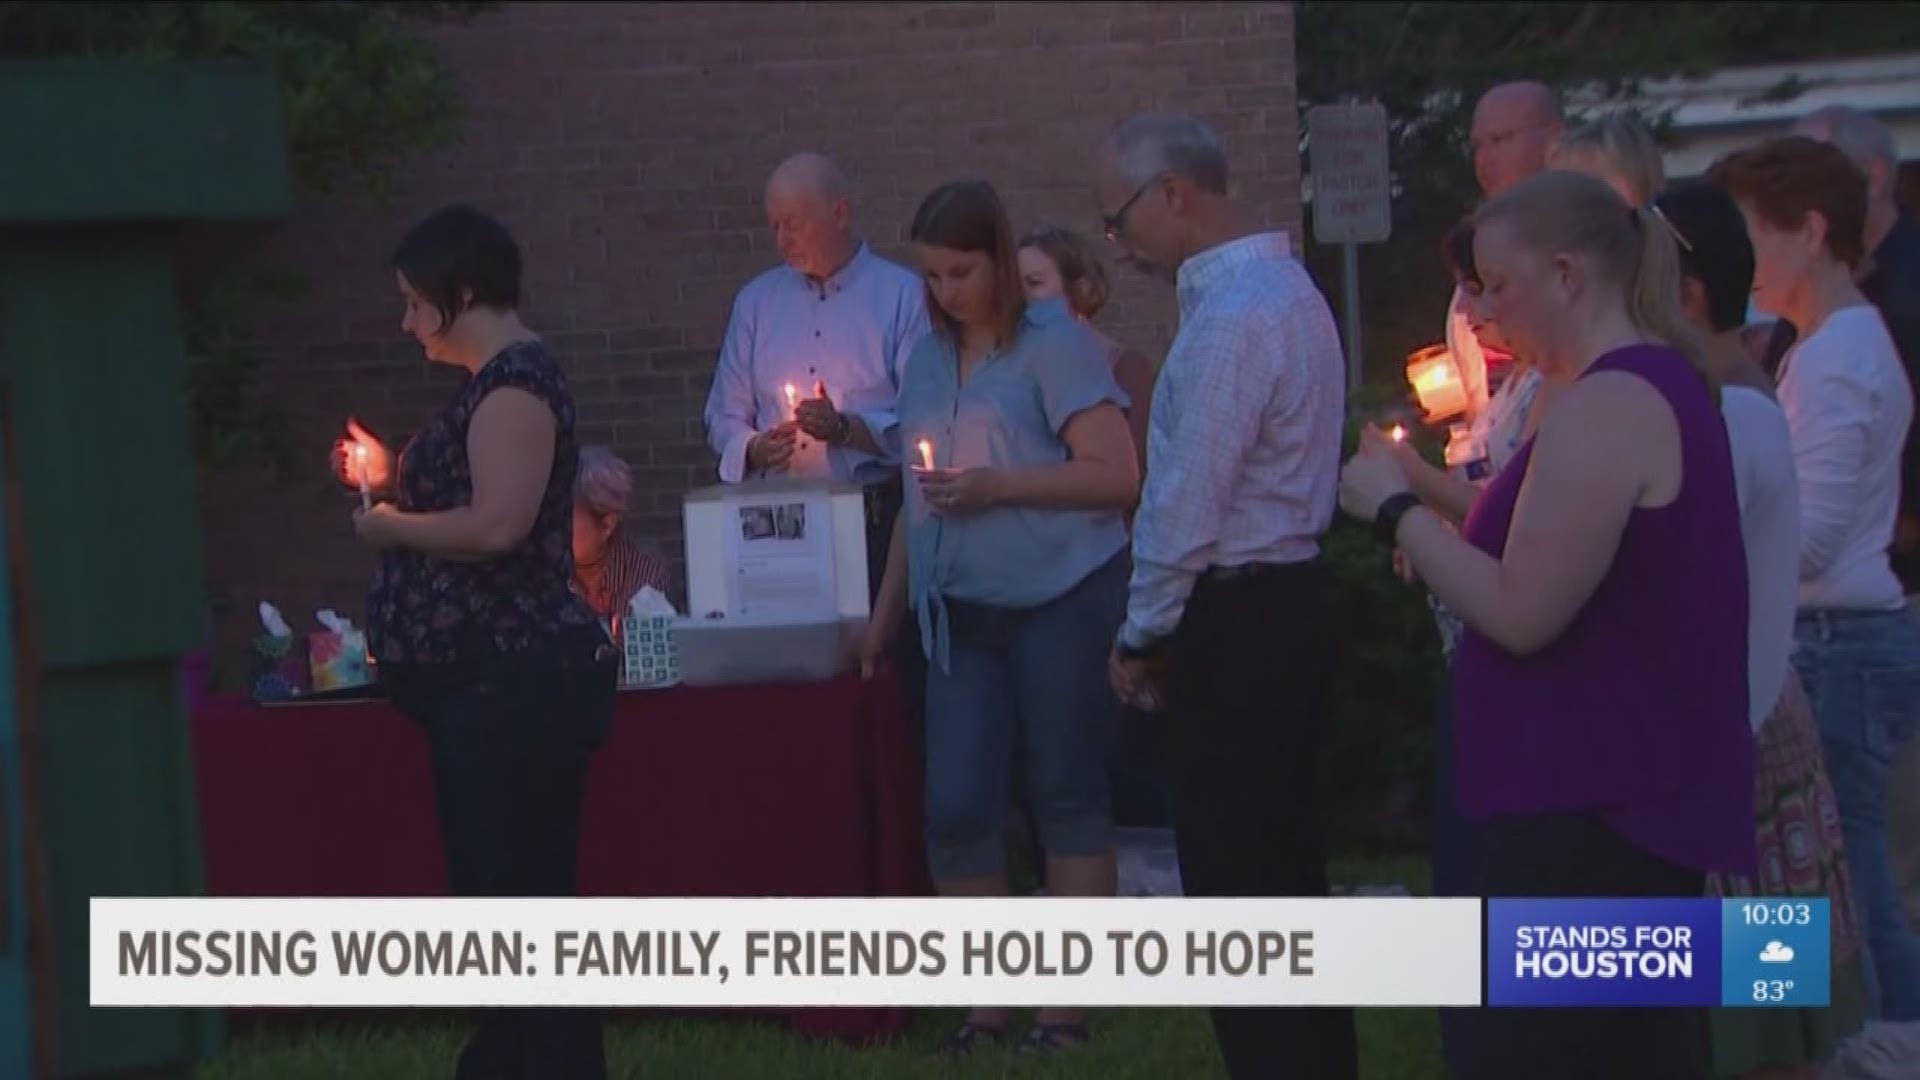 Family members and friends gathered at a vigil for Brittany Burfield who has been missing for three weeks.